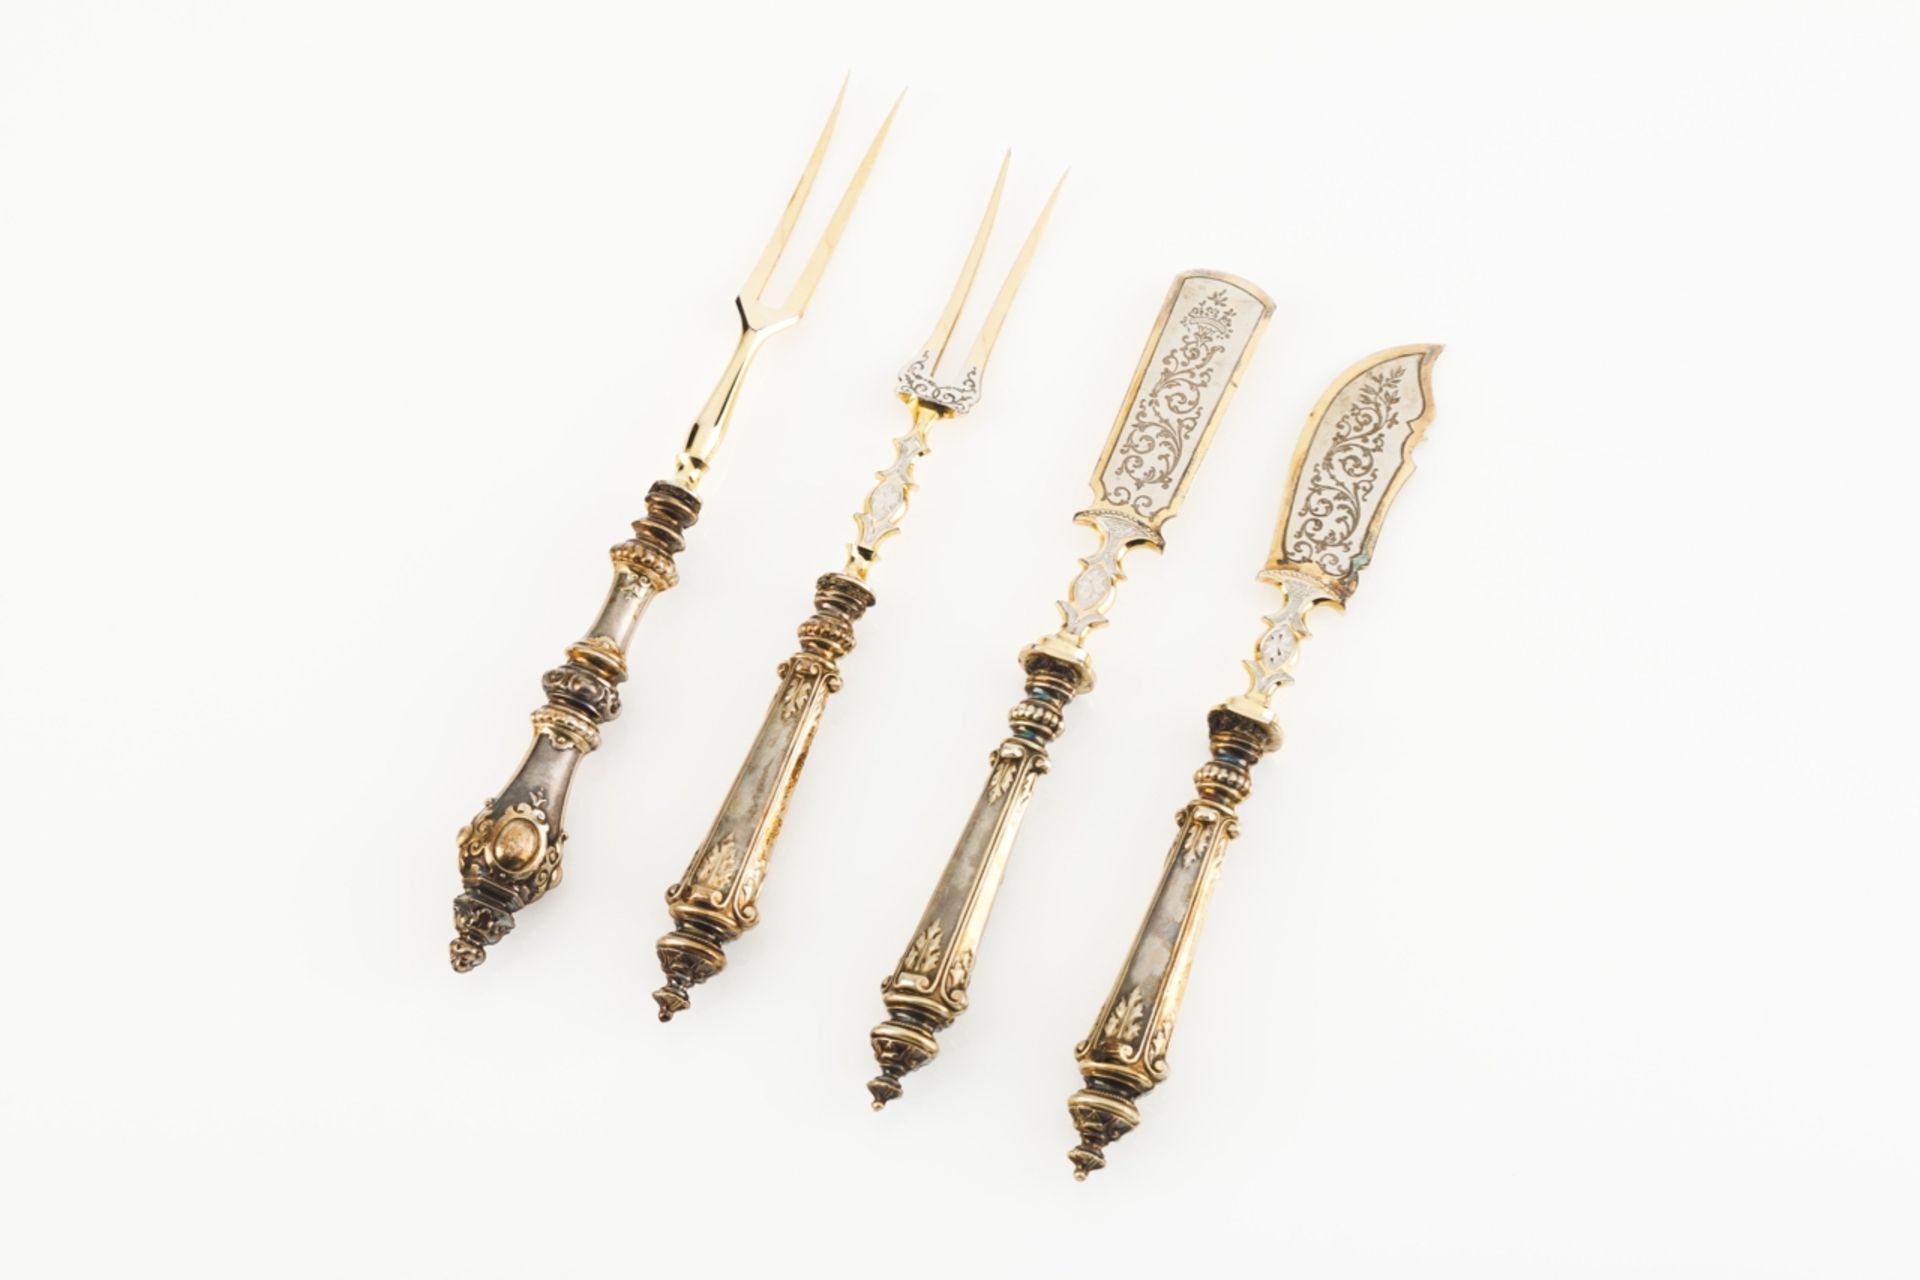 A set of Belle-Époque carvers
Partly-gilt silver handles with relief decoration
With original